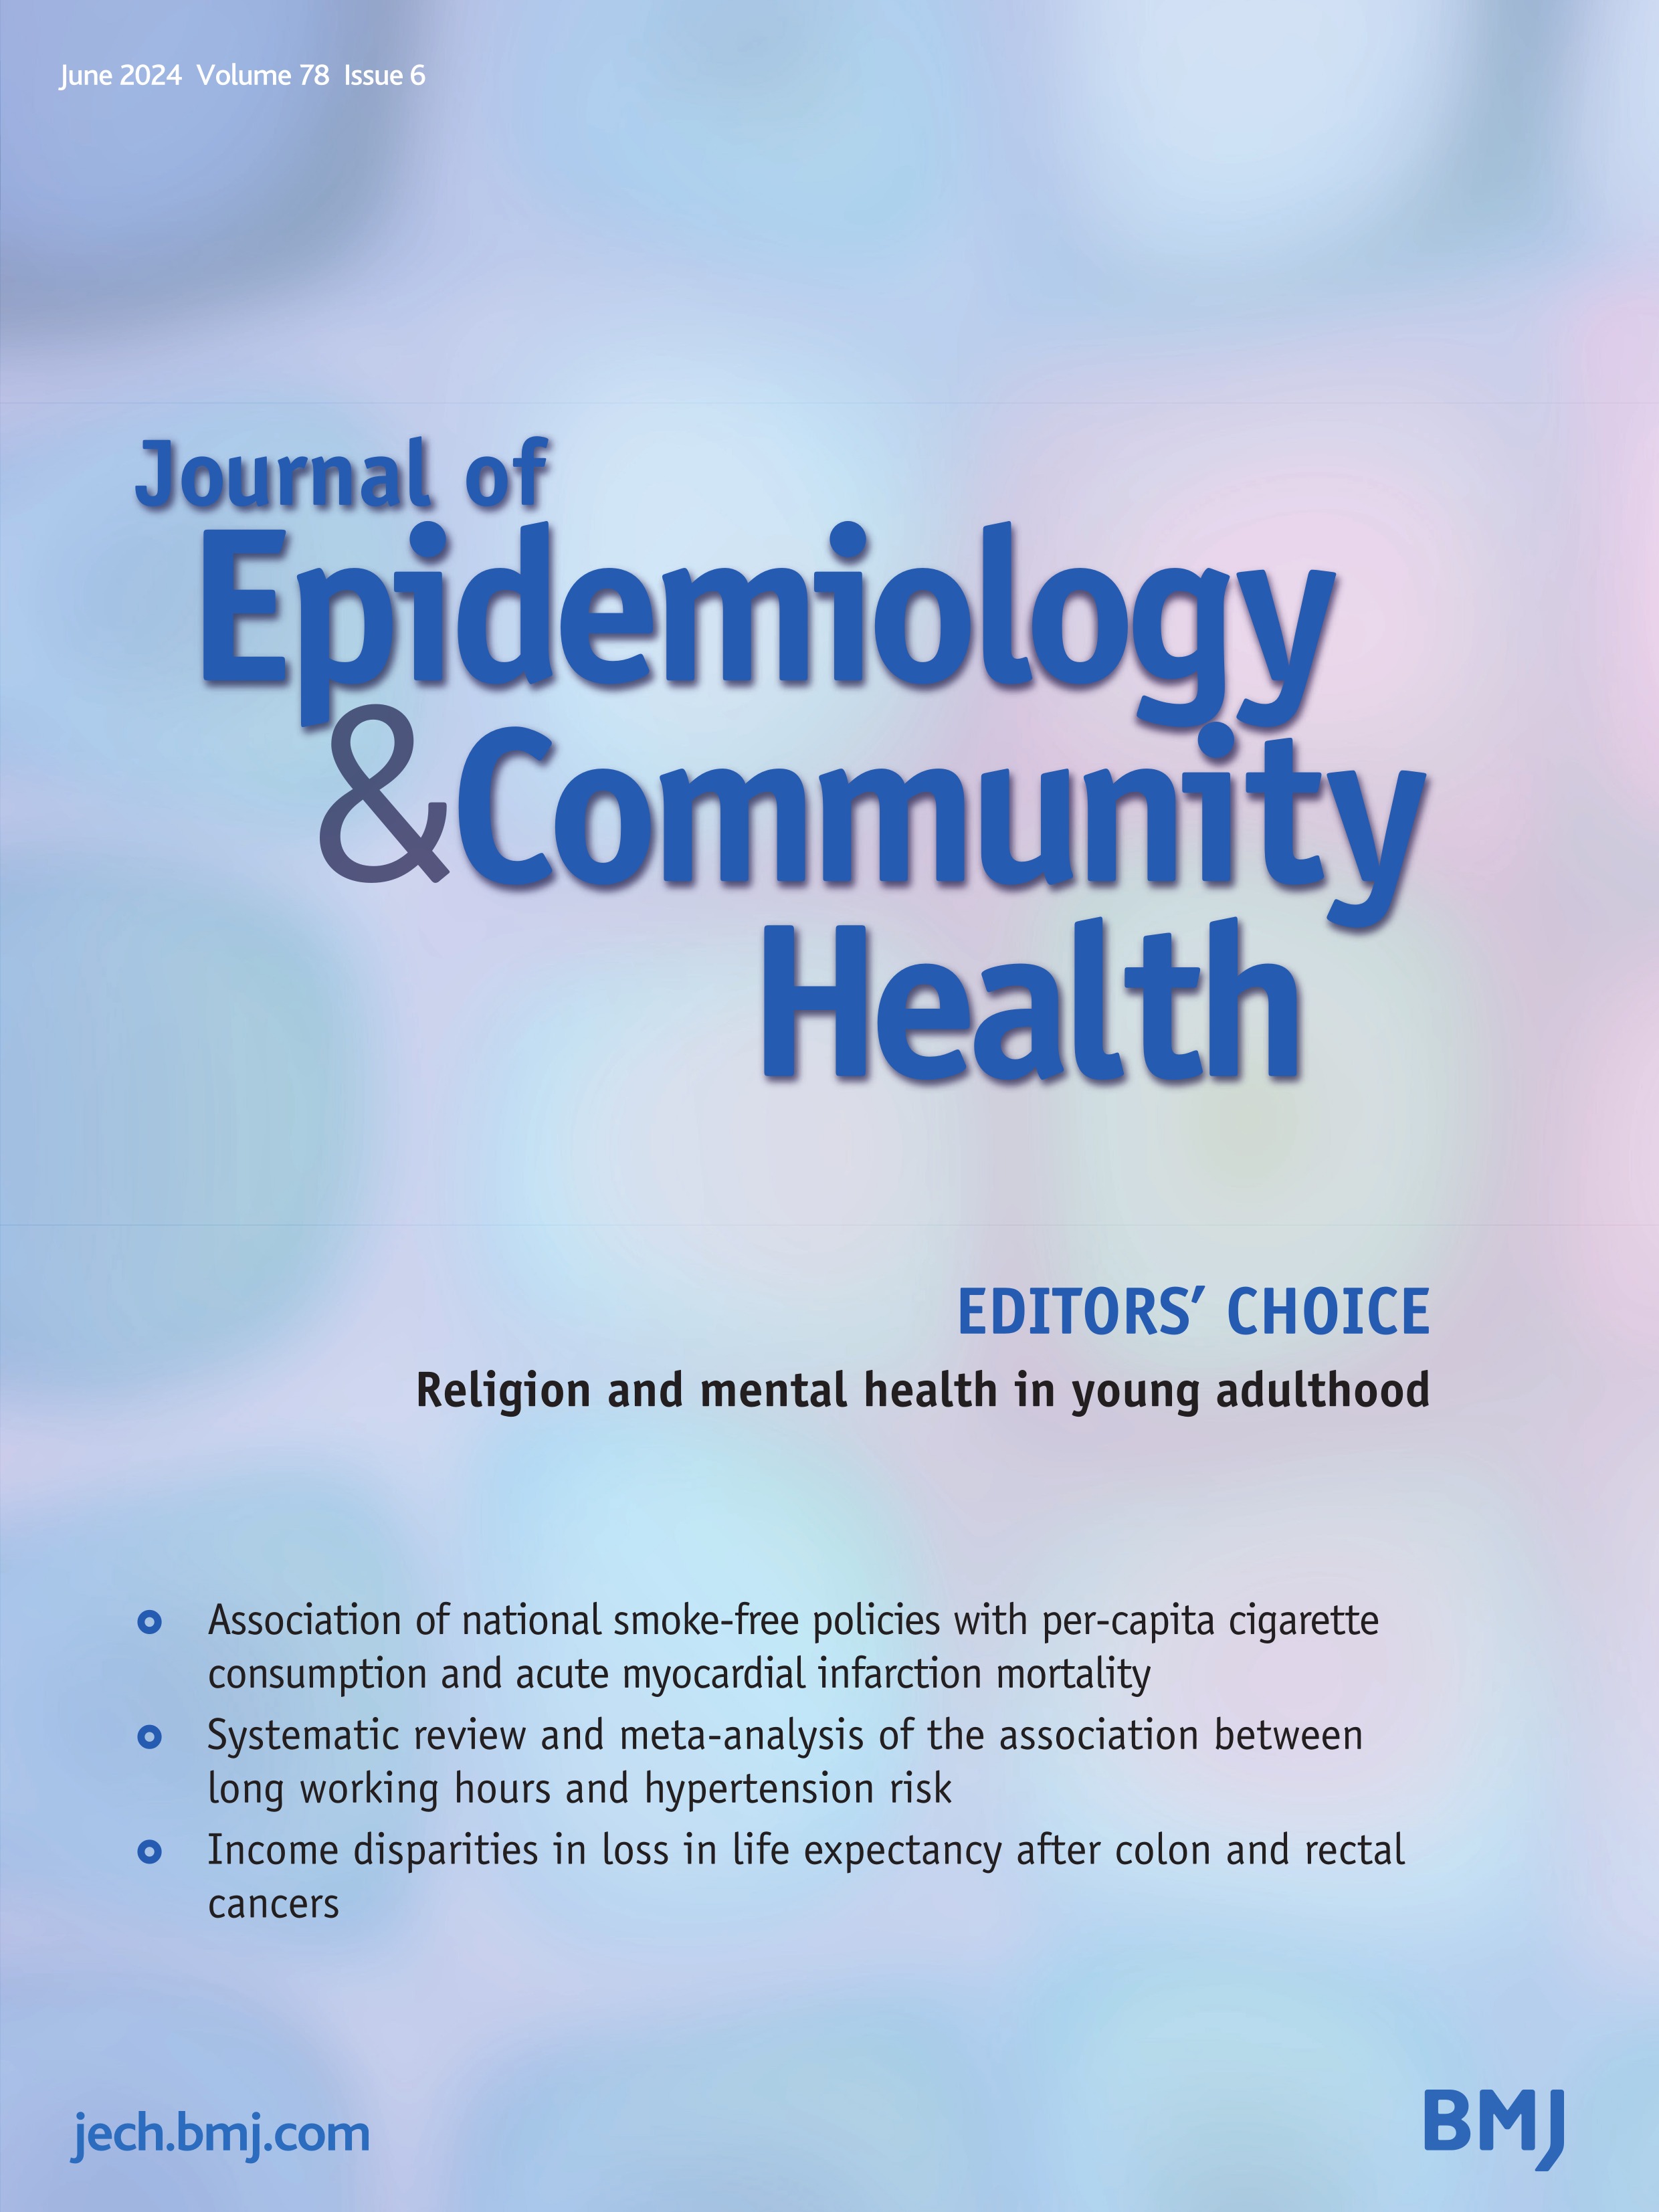 Association of national smoke-free policies with per-capita cigarette consumption and acute myocardial infarction mortality in Europe